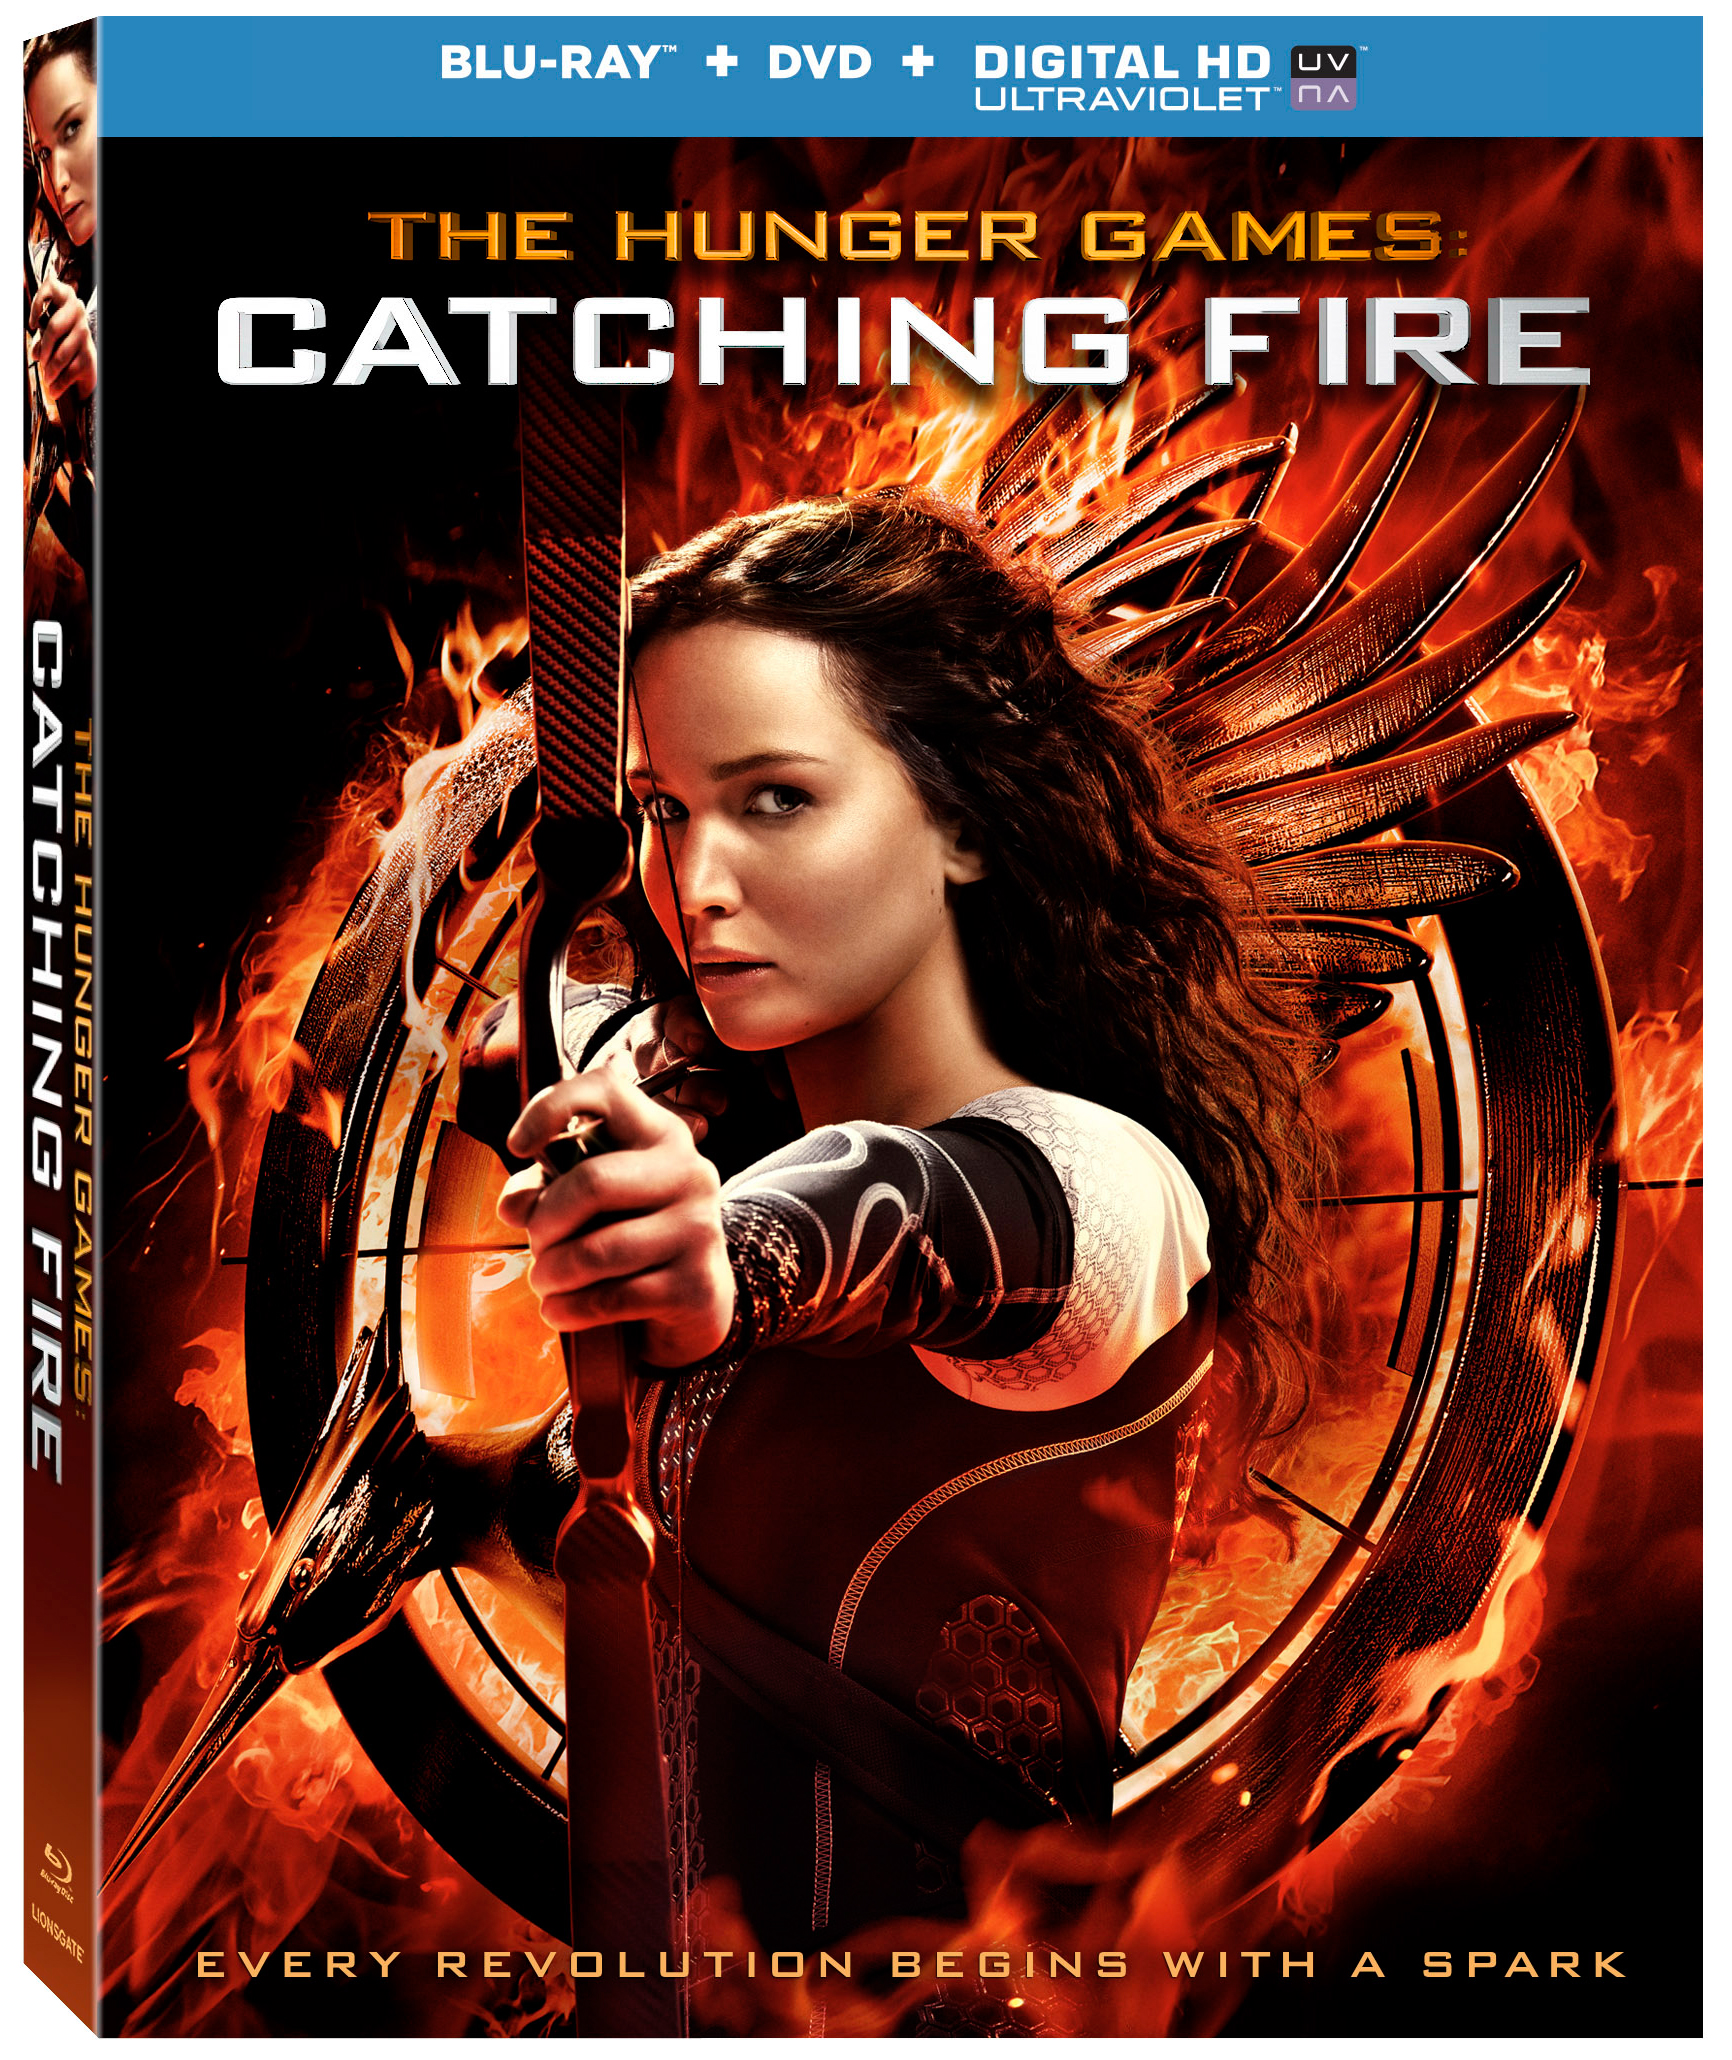 The Hunger Games: Catching Fire Blu-ray Review